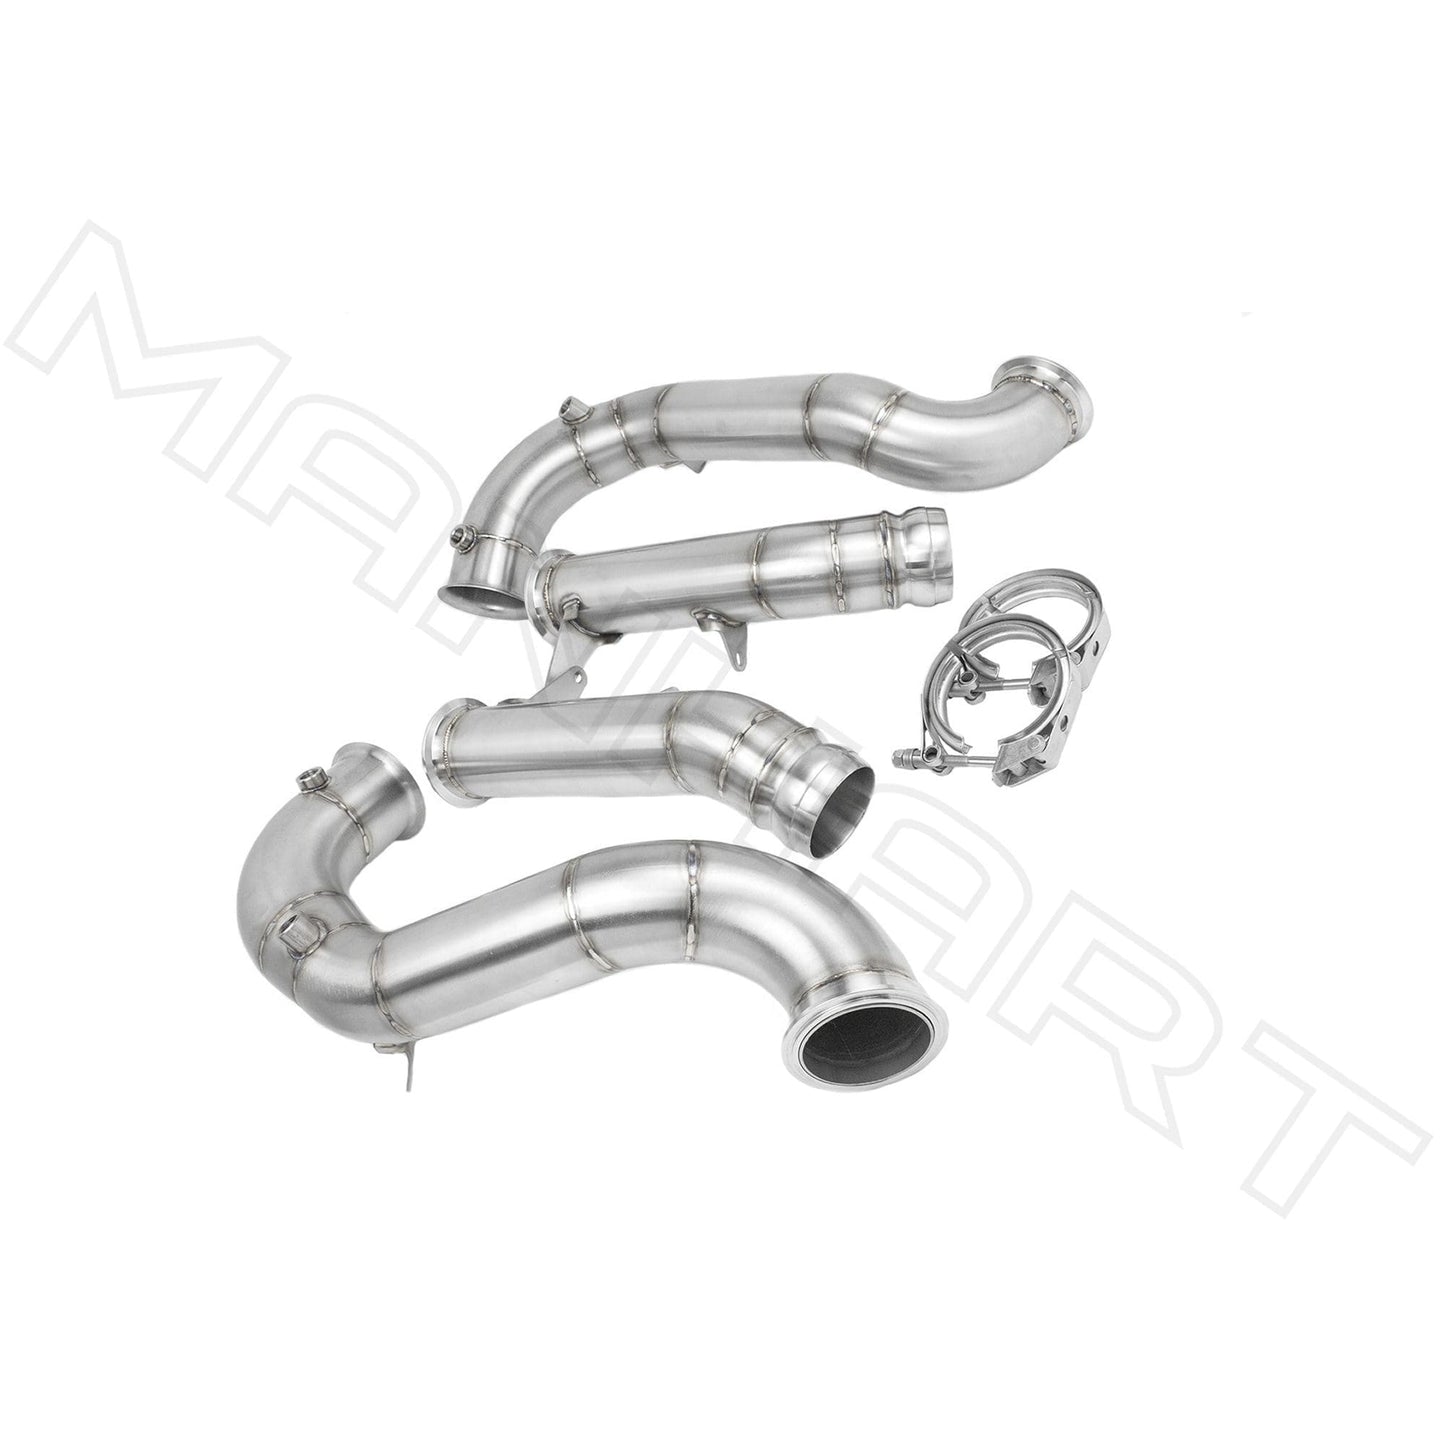 MANHART MH5C63100 DOWNPIPES RACE FOR MERCEDES-AMG C 63 (S)